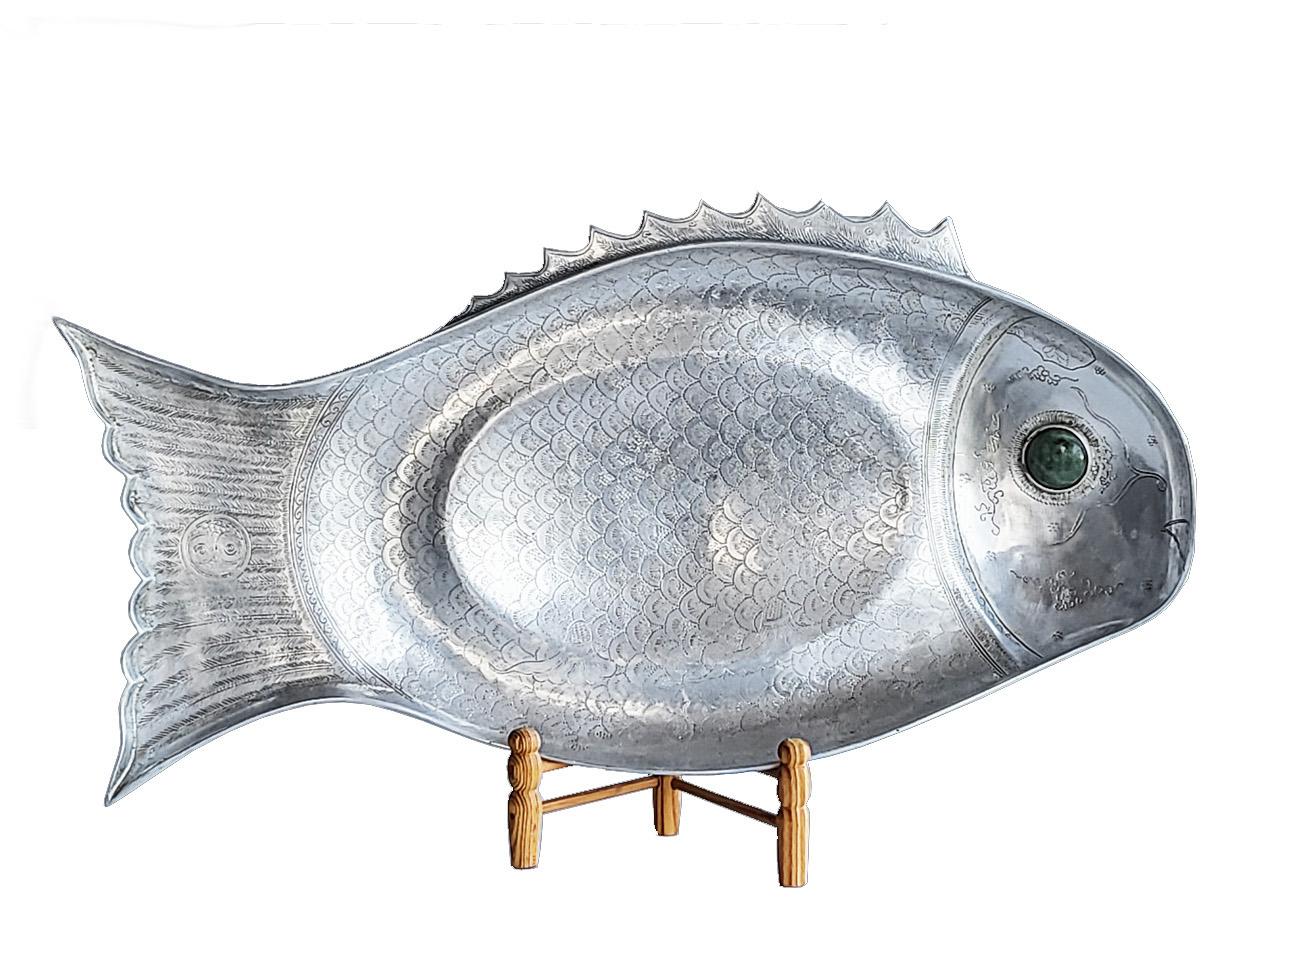 Large 1975 Arthur Court Forged Aluminum Fish Platter, Jadeite Stone Eye

Offered for sale is a large fish platter from Arthur Court Designs, 1975. While large, stunning, and decorative, it is also food safe and useful. The stone eye is